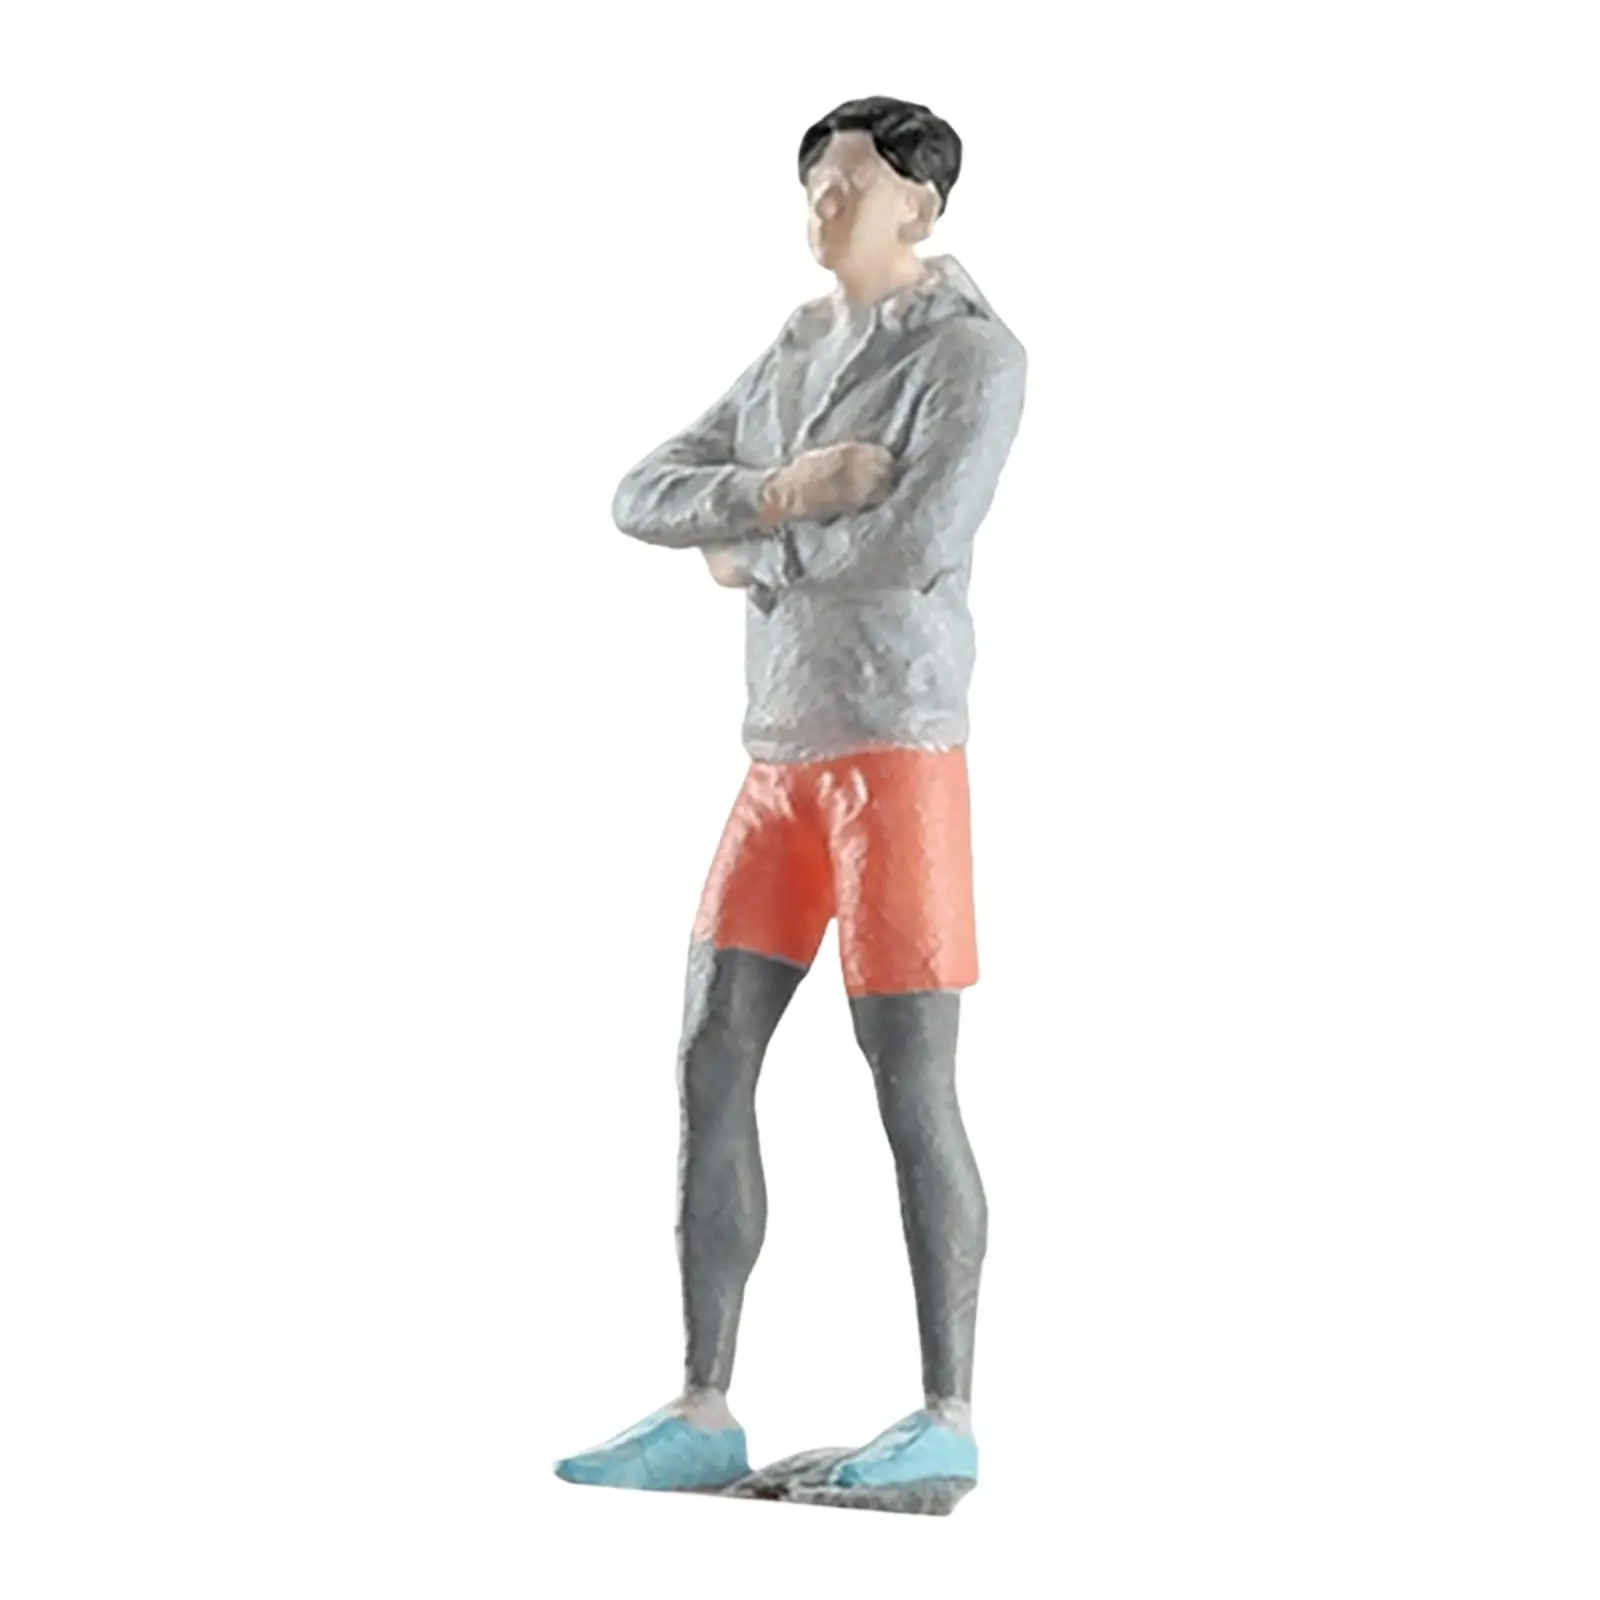 People Figures 1/64 Scale Mini Running Boy Doll Toy for Park Train Street